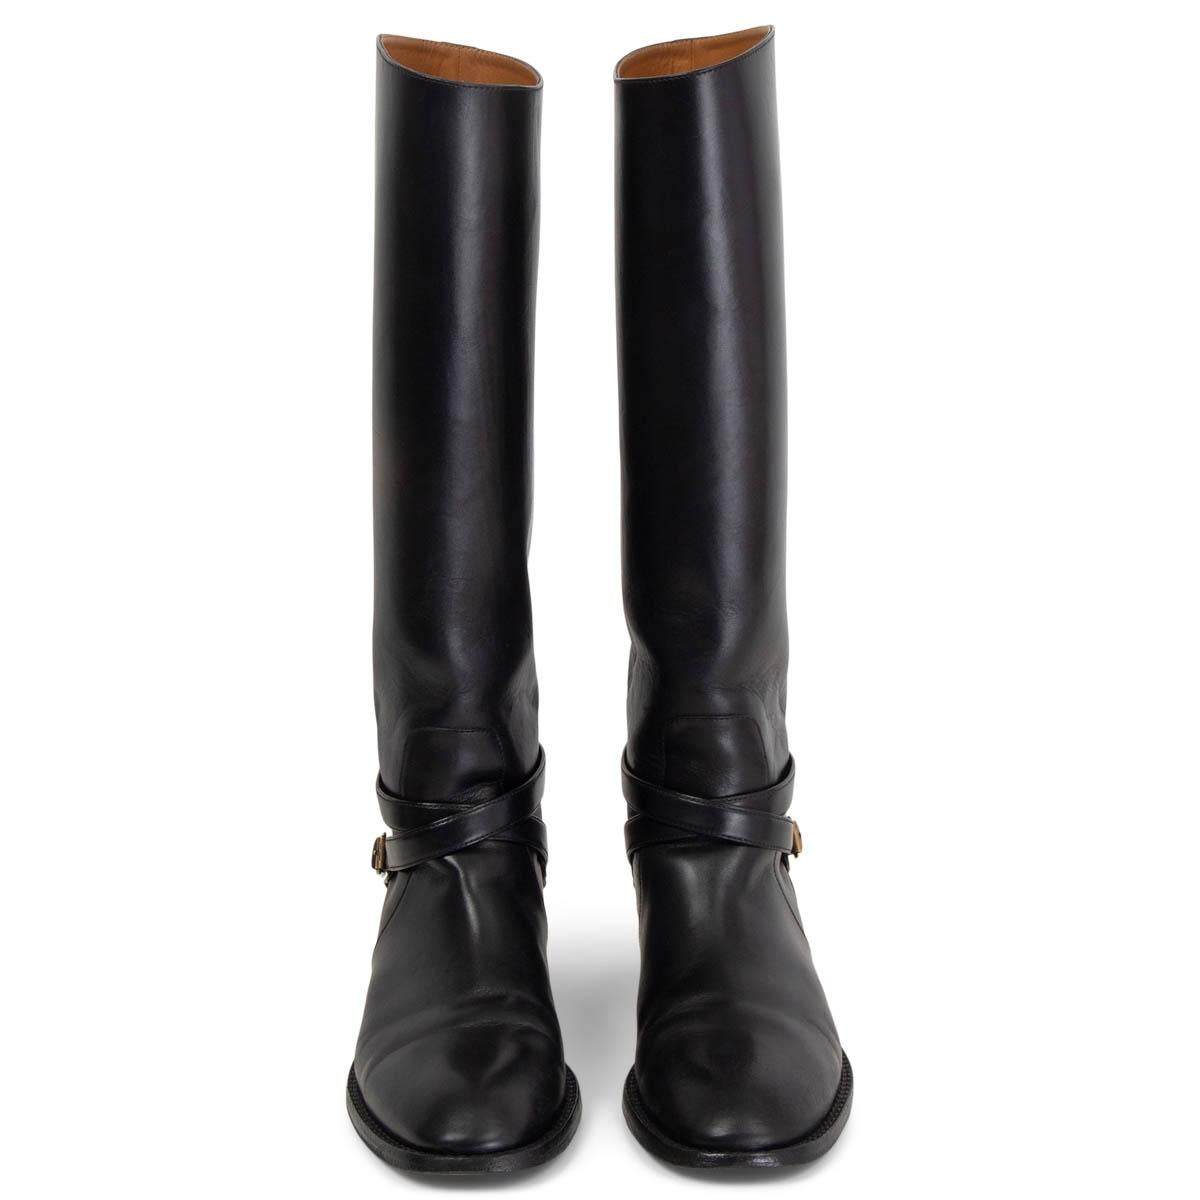 100% authentic Saint Laurent Cavaliere Buckled Riding Boots in black calfskin with belted detail around the ankle. Have been worn and need a new sole at front. Overall in excellent condition. Come with dust bag. 

Measurements
Imprinted Size	41
Shoe